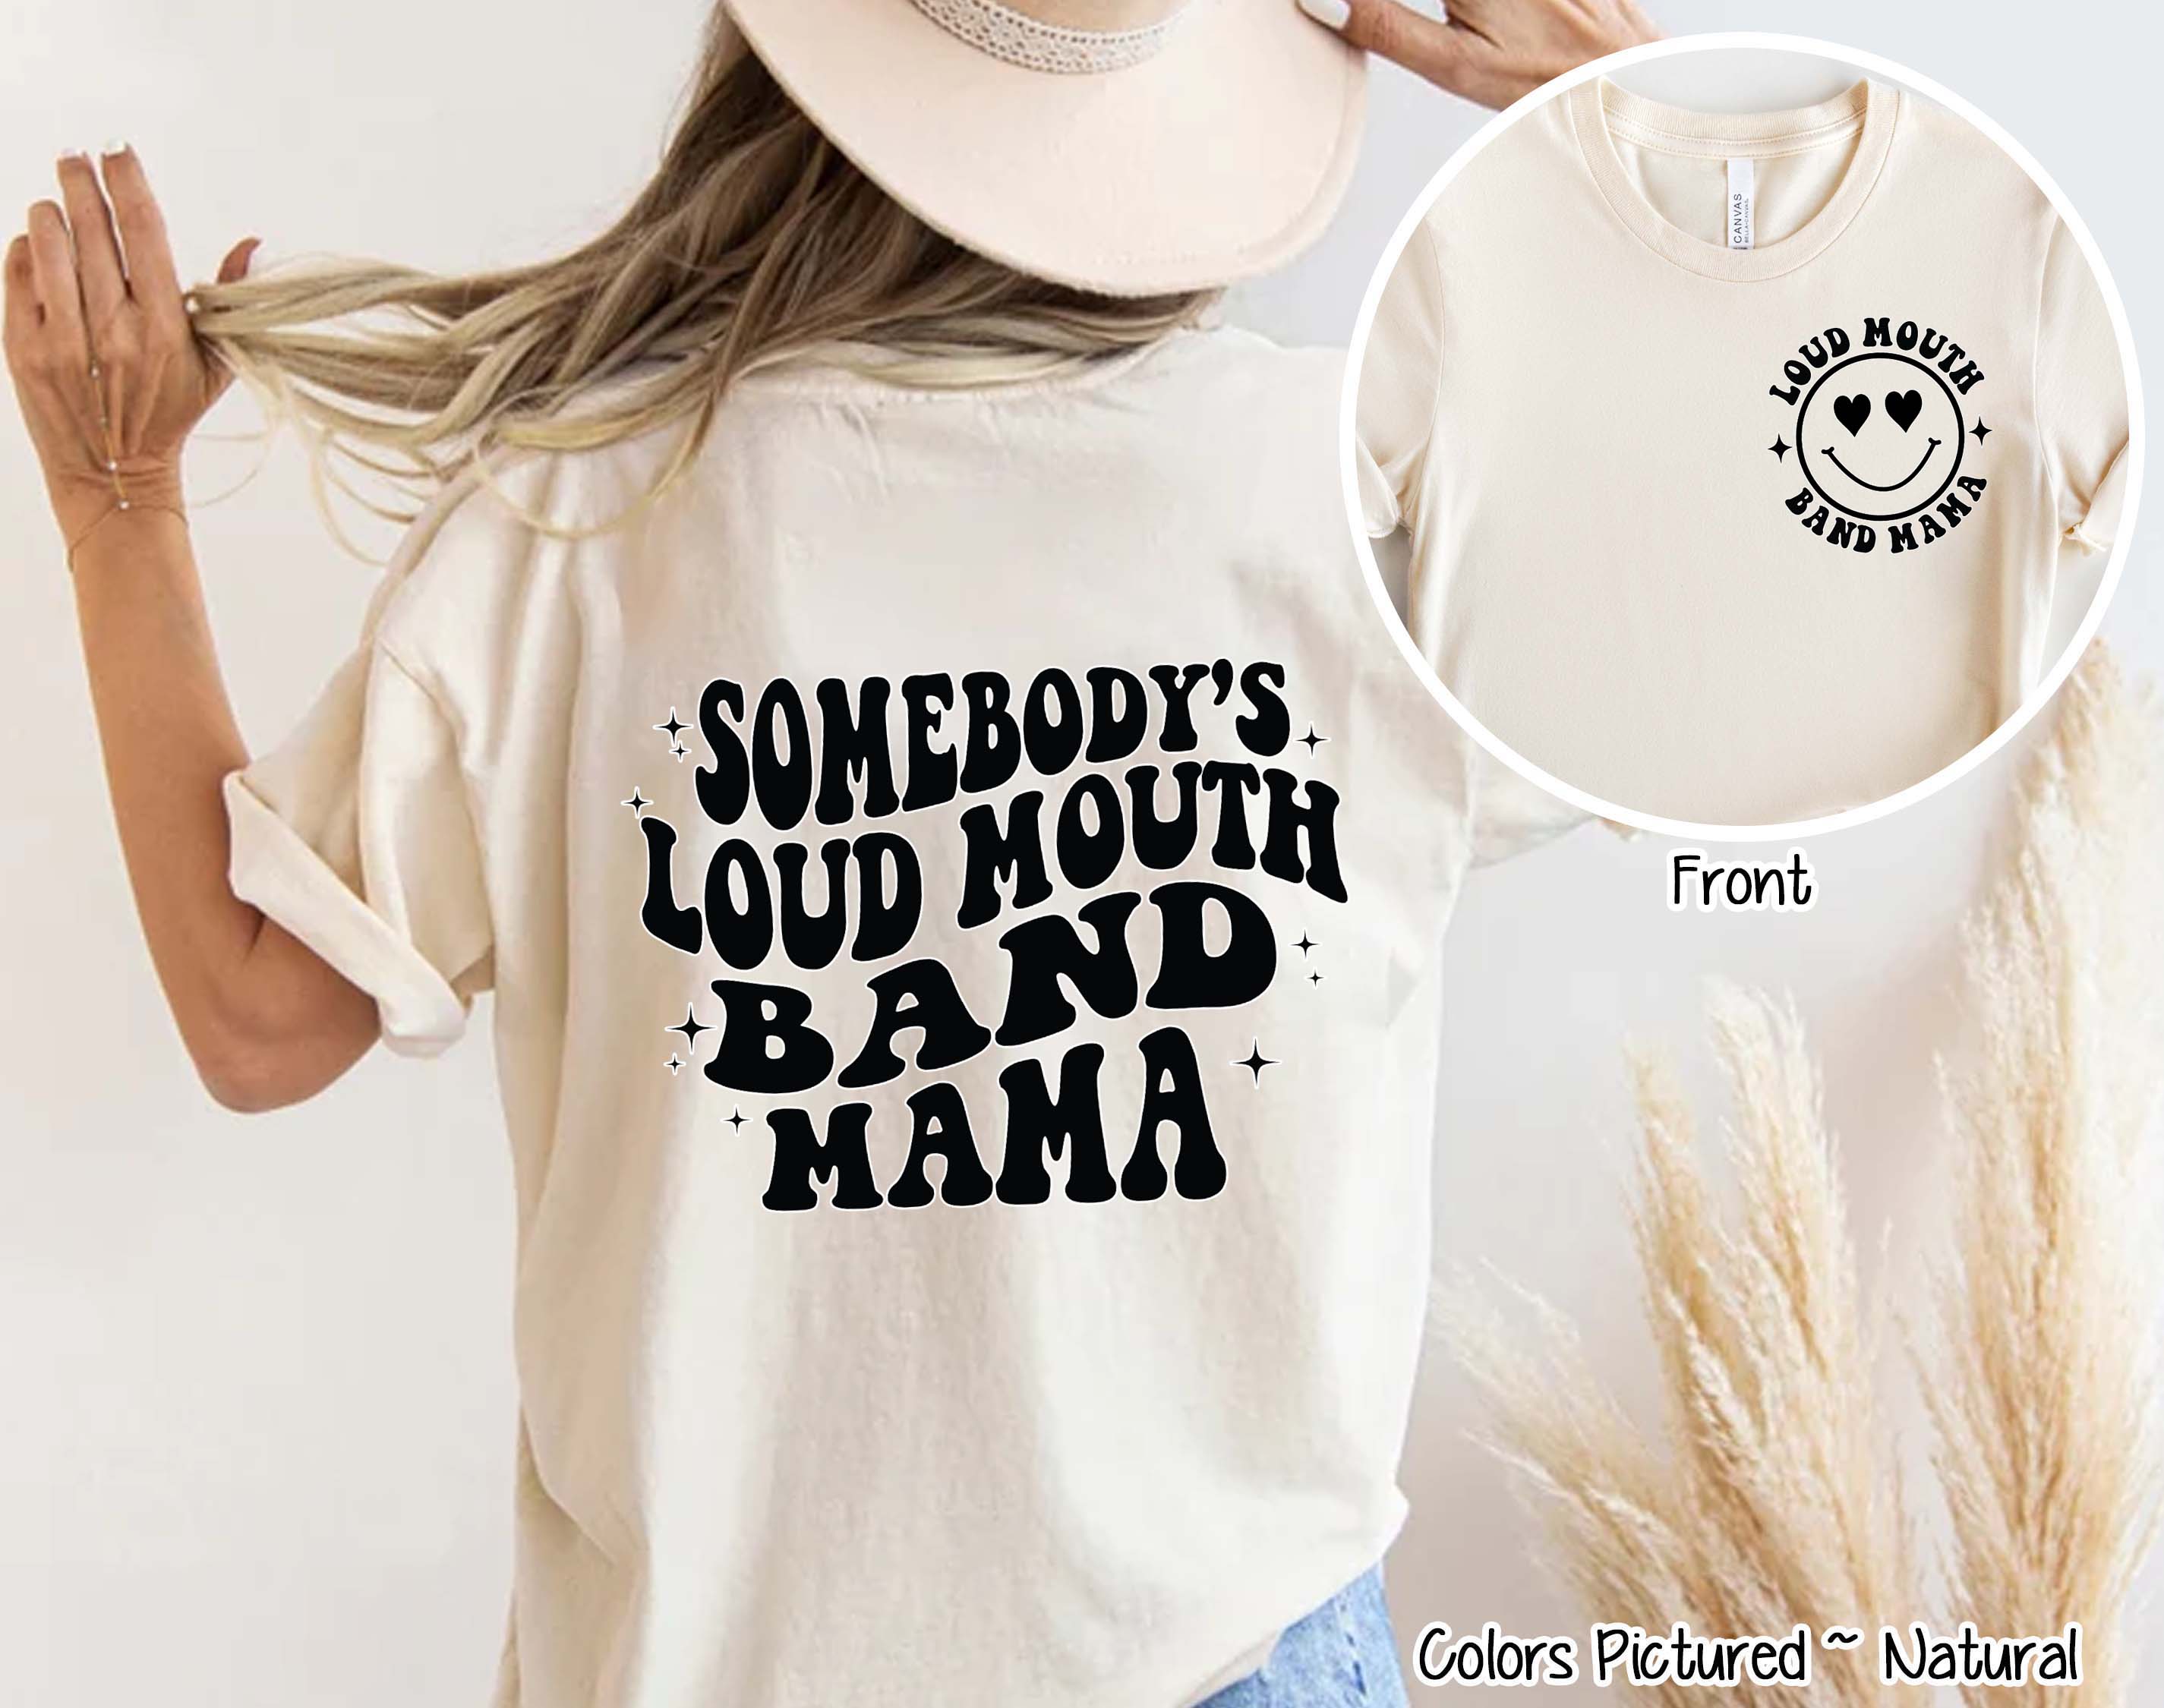 Somebody's Loud Mouth Band Mama 2 Sided Print Tee